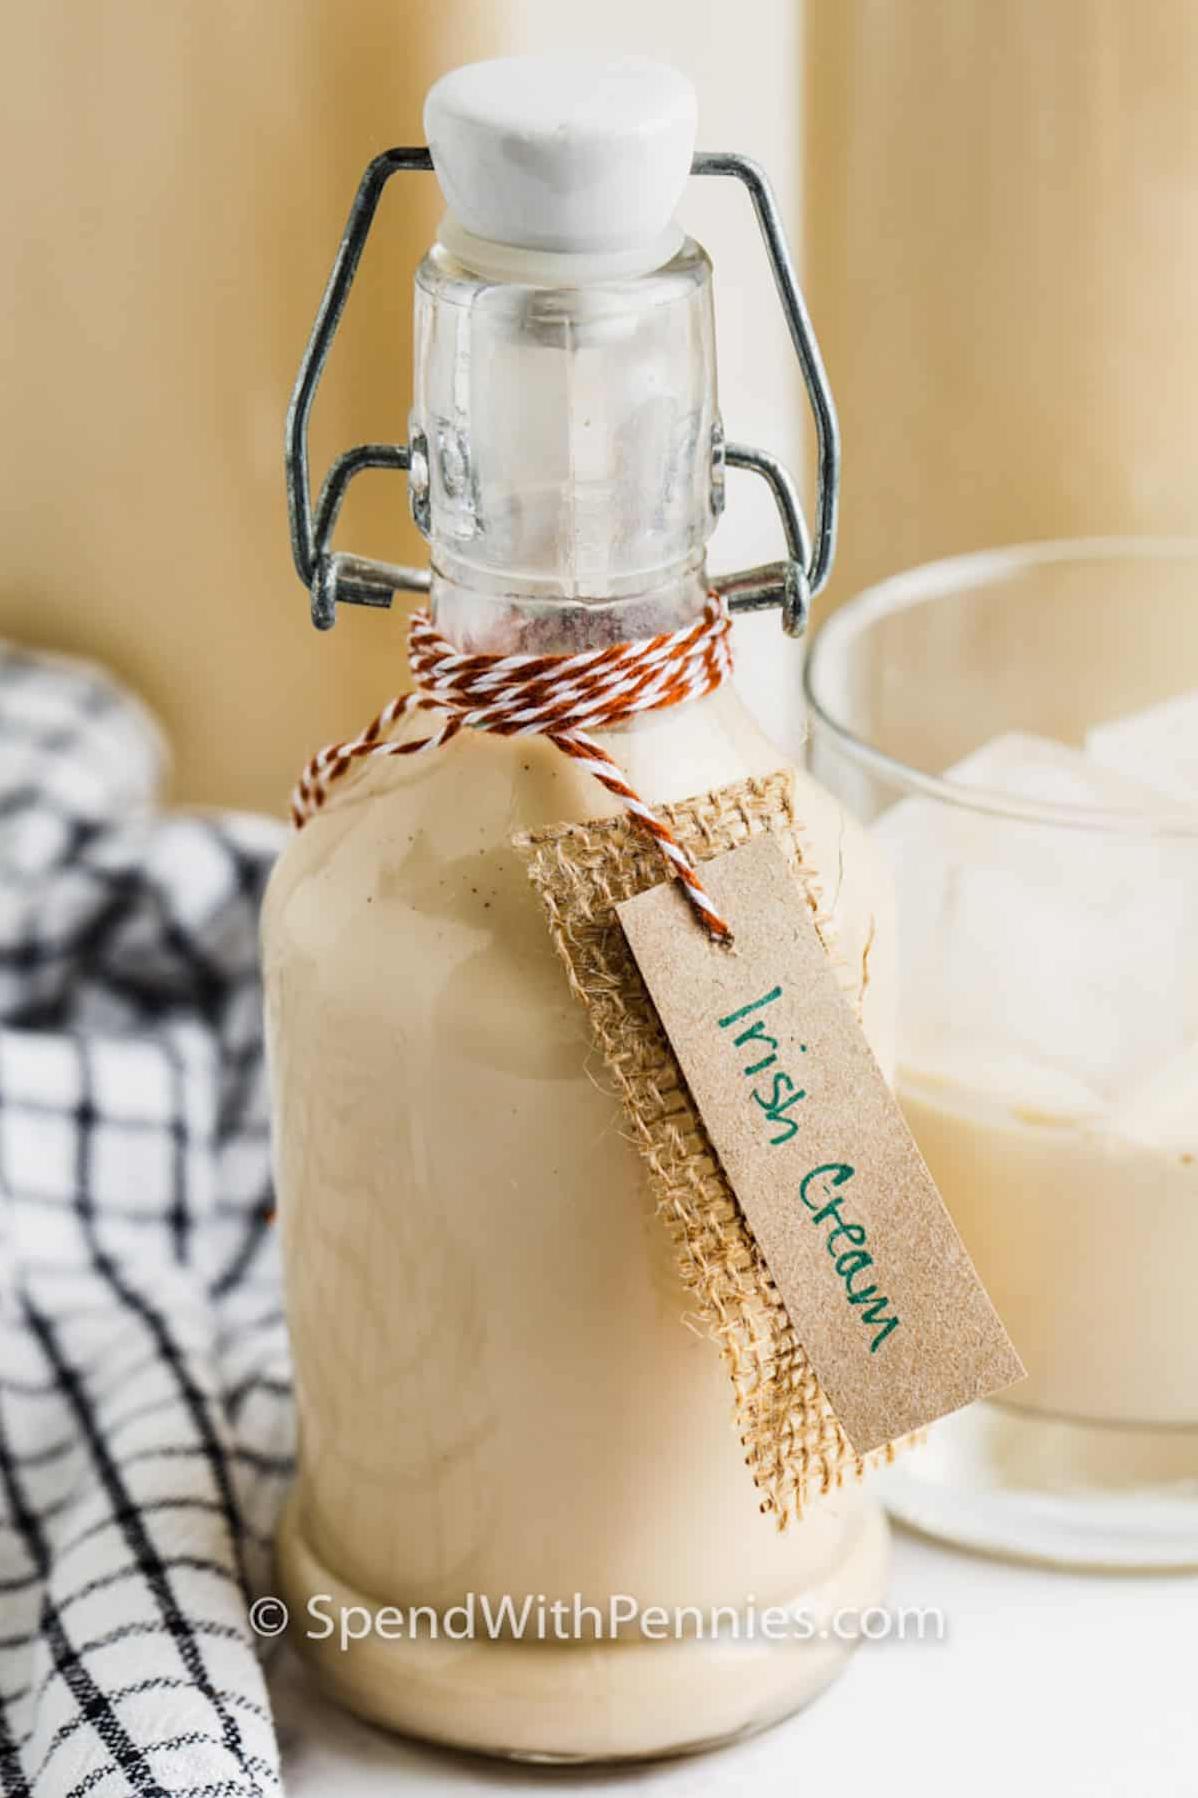  Can you taste the velvety smoothness of this homemade Irish Cream?